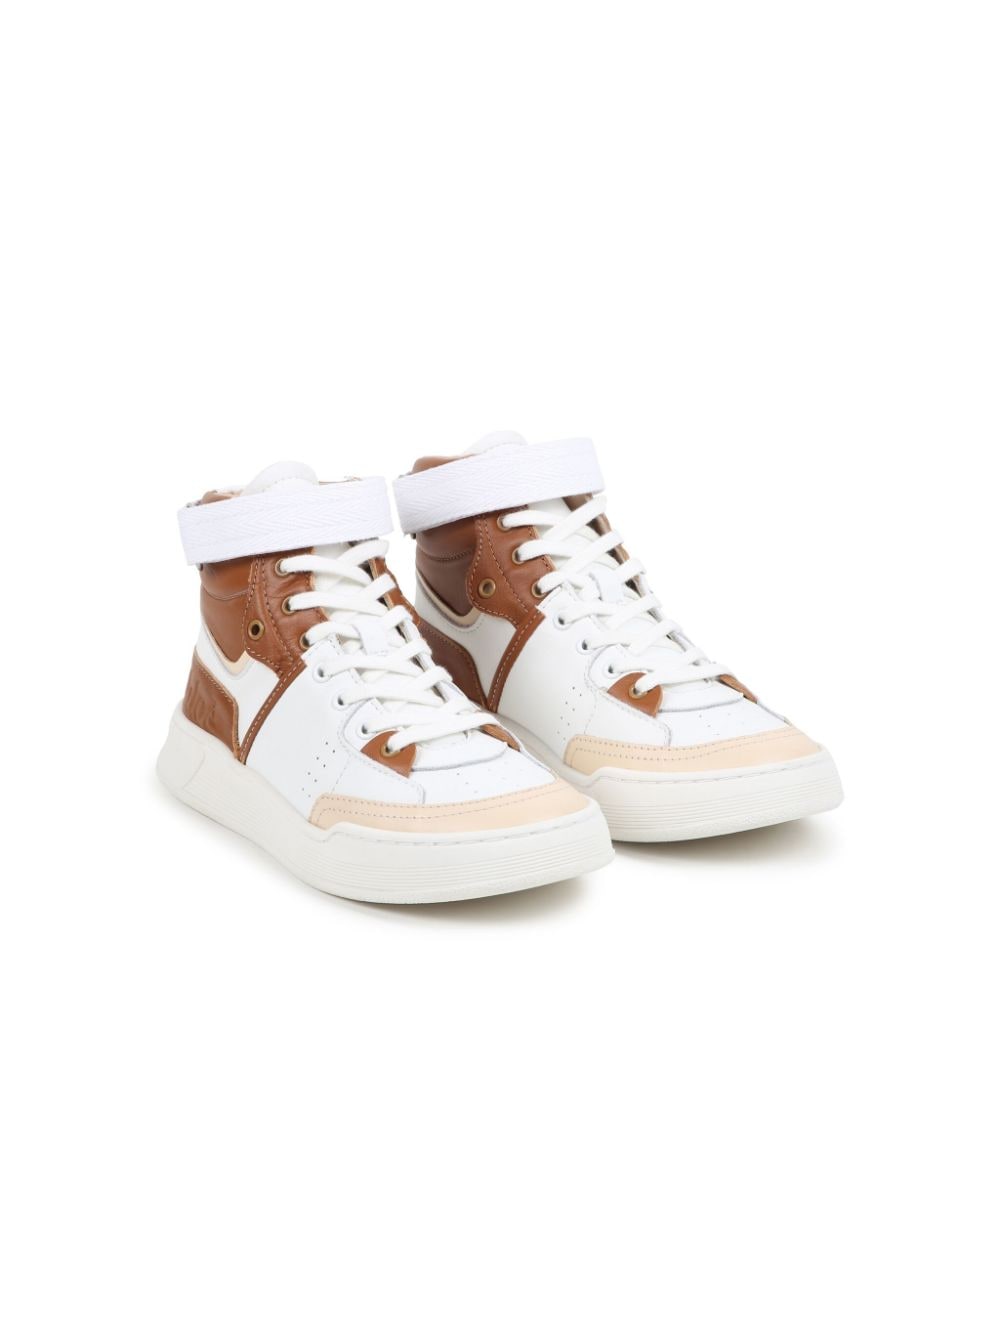 Chloé Kids' Panelled High-top Sneakers In White